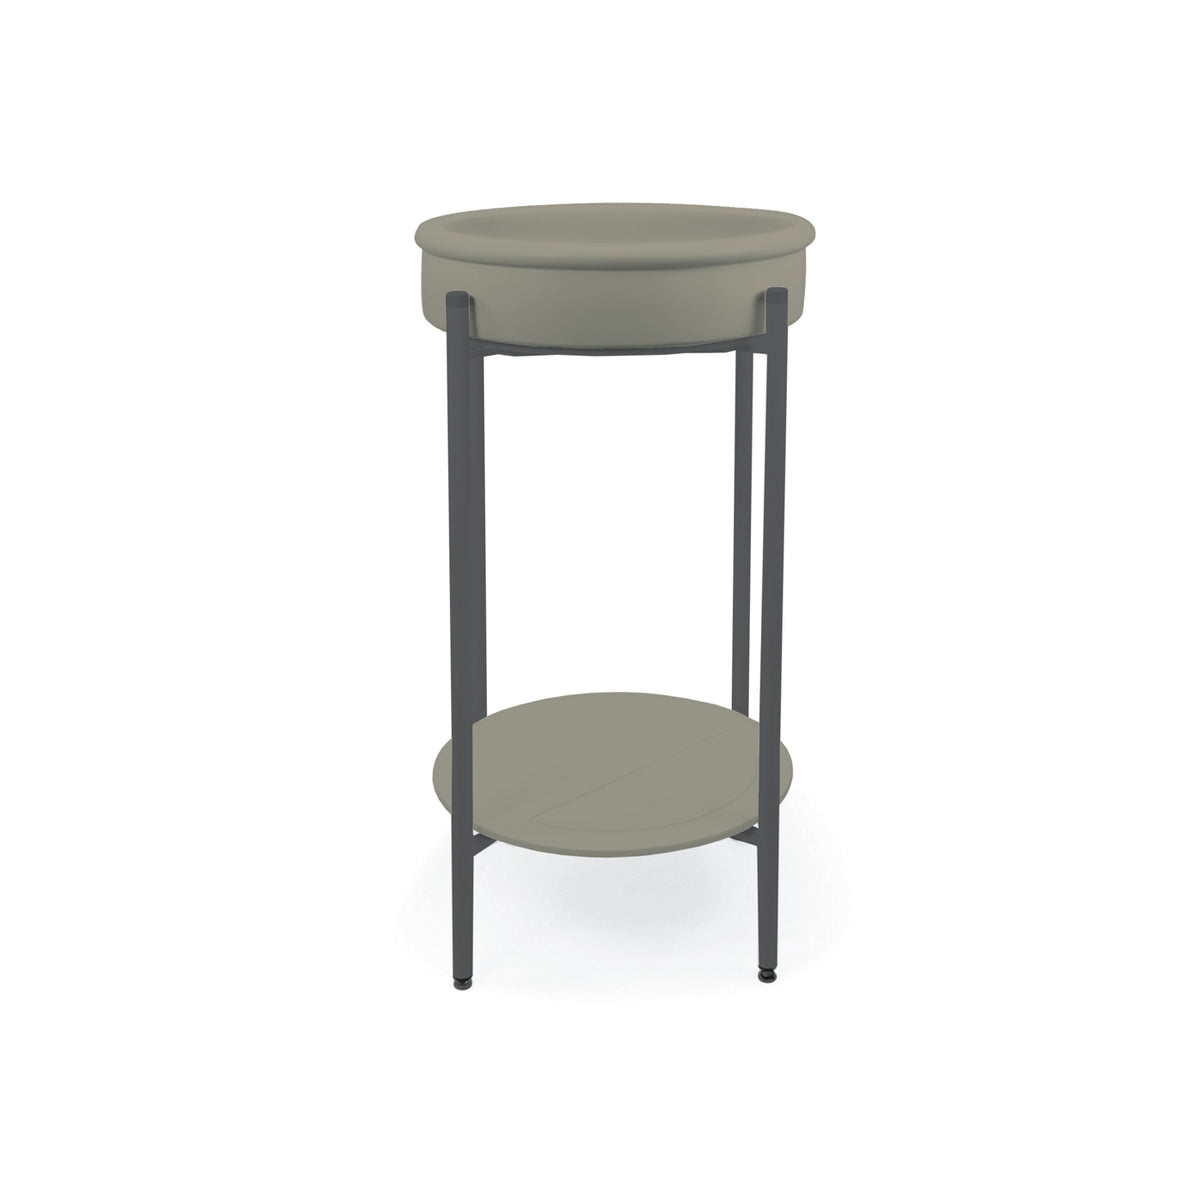 Tubb Basin - Stand (Olive)